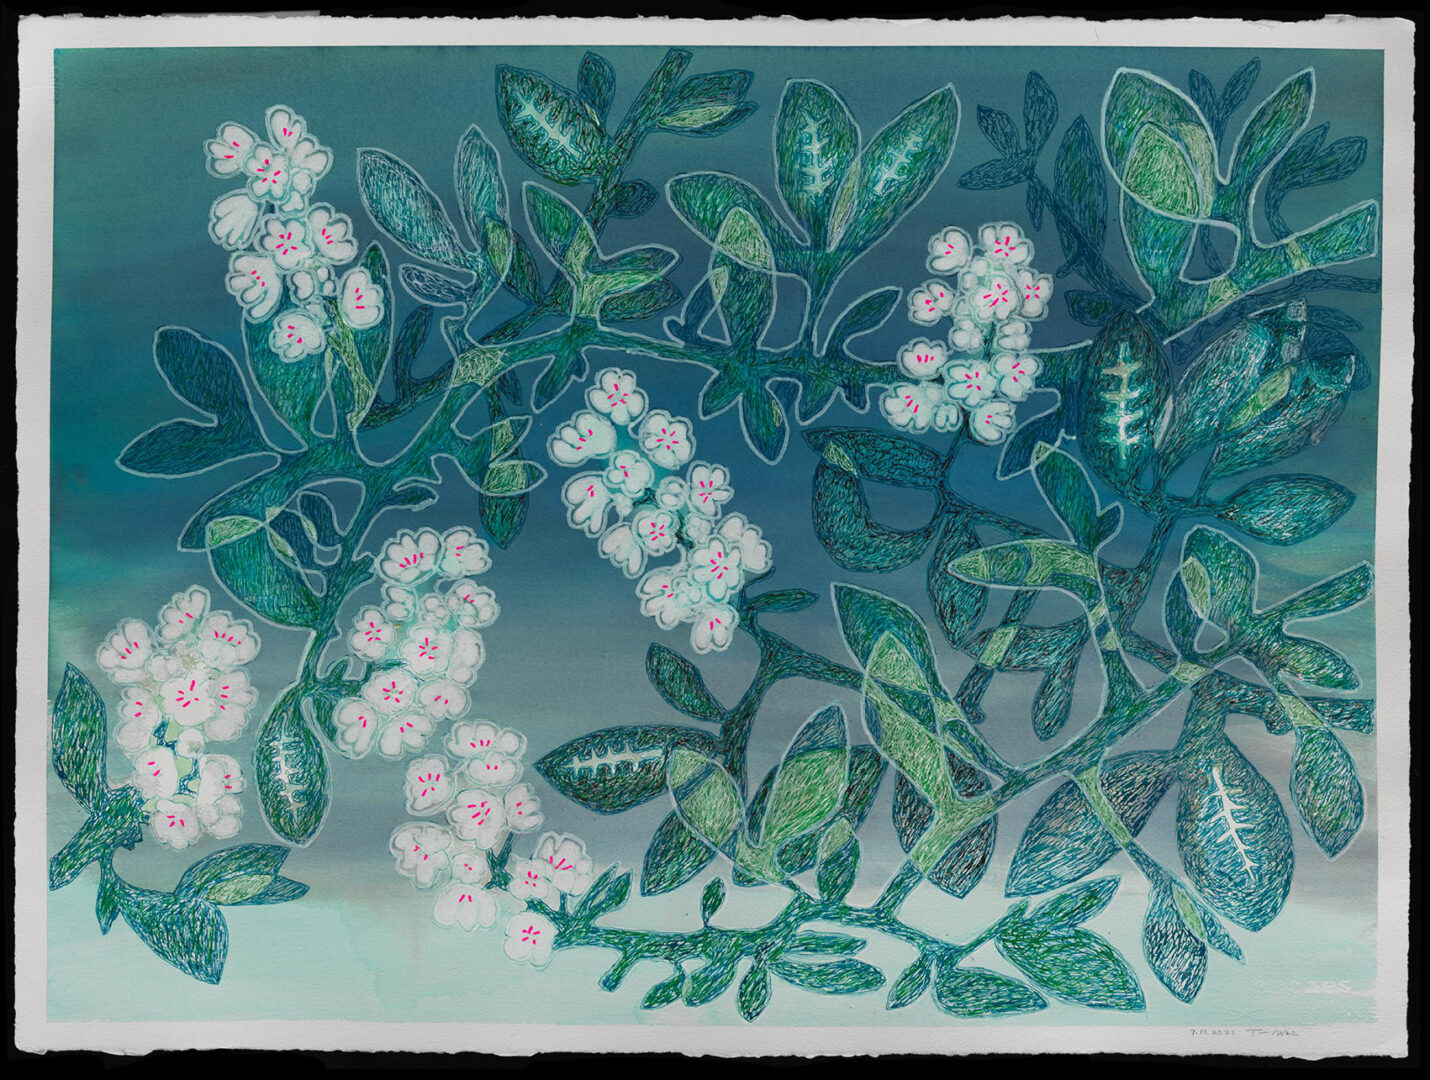 A painting of flowers and leaves on a blue background